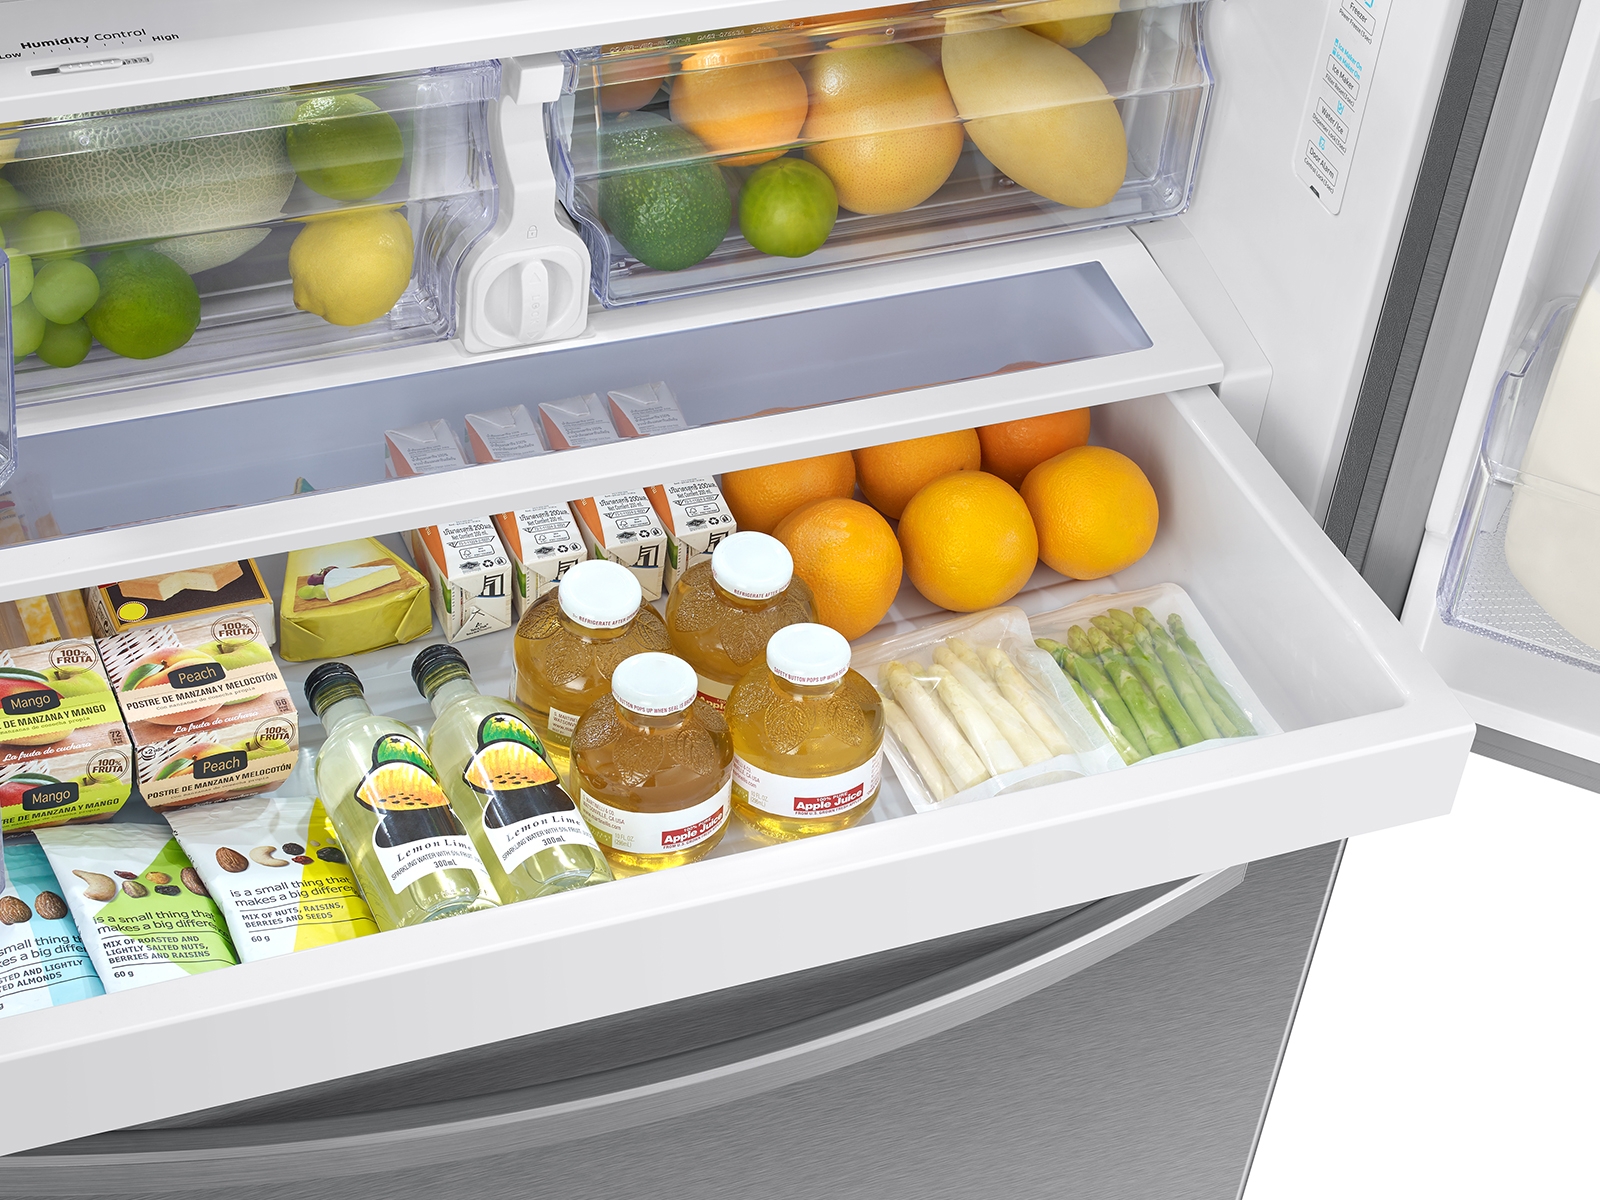 Use the Dual Ice maker on your Samsung refrigerator